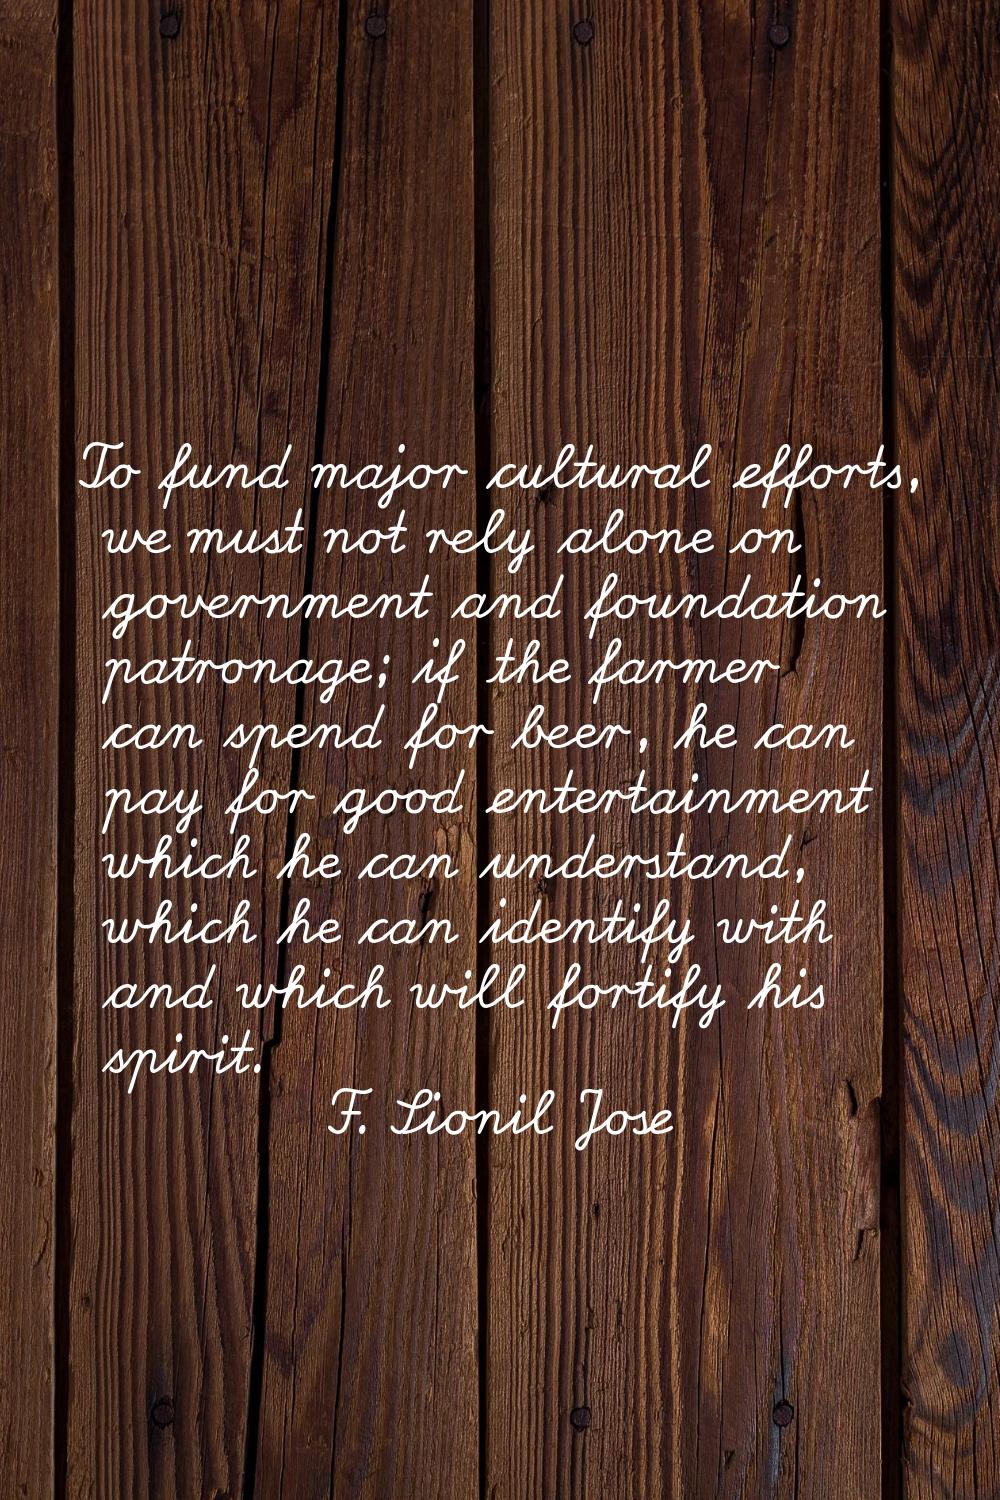 To fund major cultural efforts, we must not rely alone on government and foundation patronage; if t